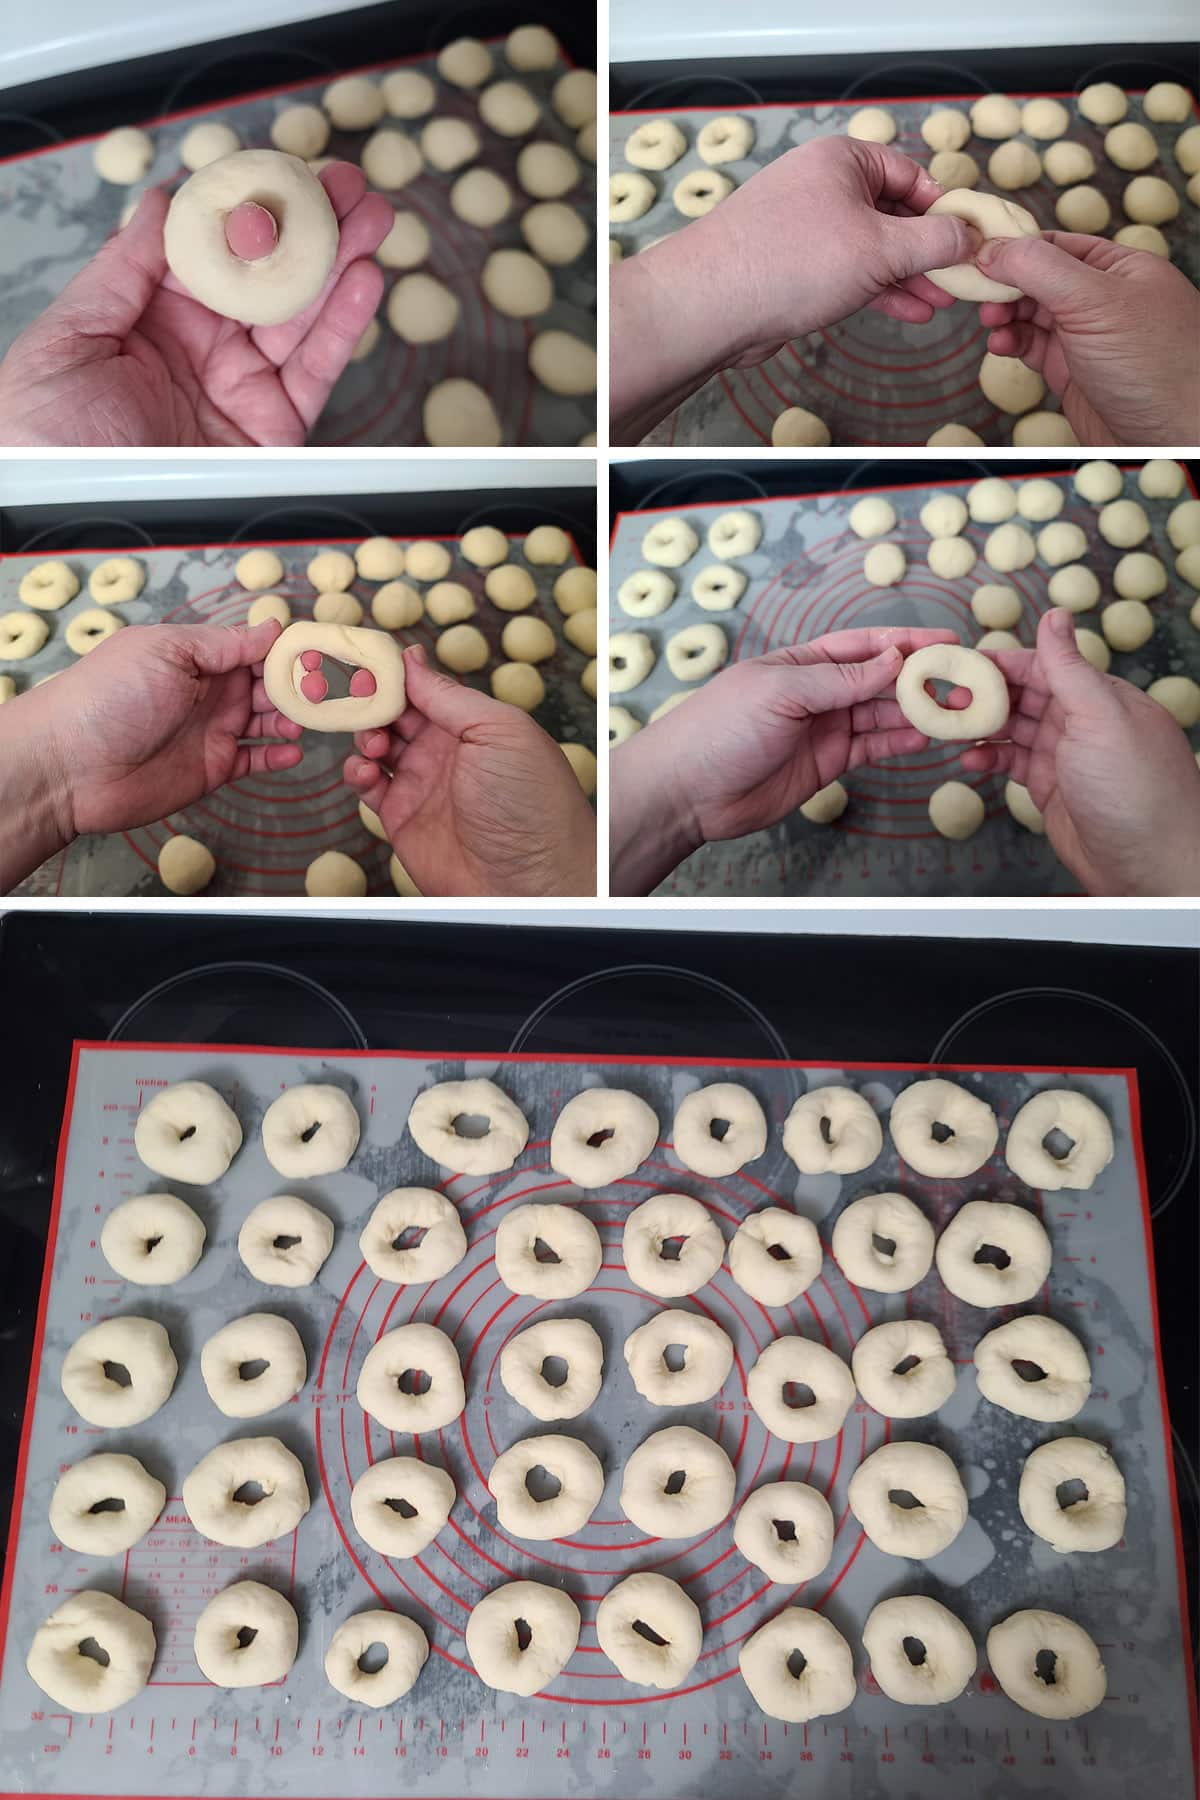 A 5 part image showing a finger poking through a dough ball, stretching it out into a bagel, and 40 mini bagels on the work surface.